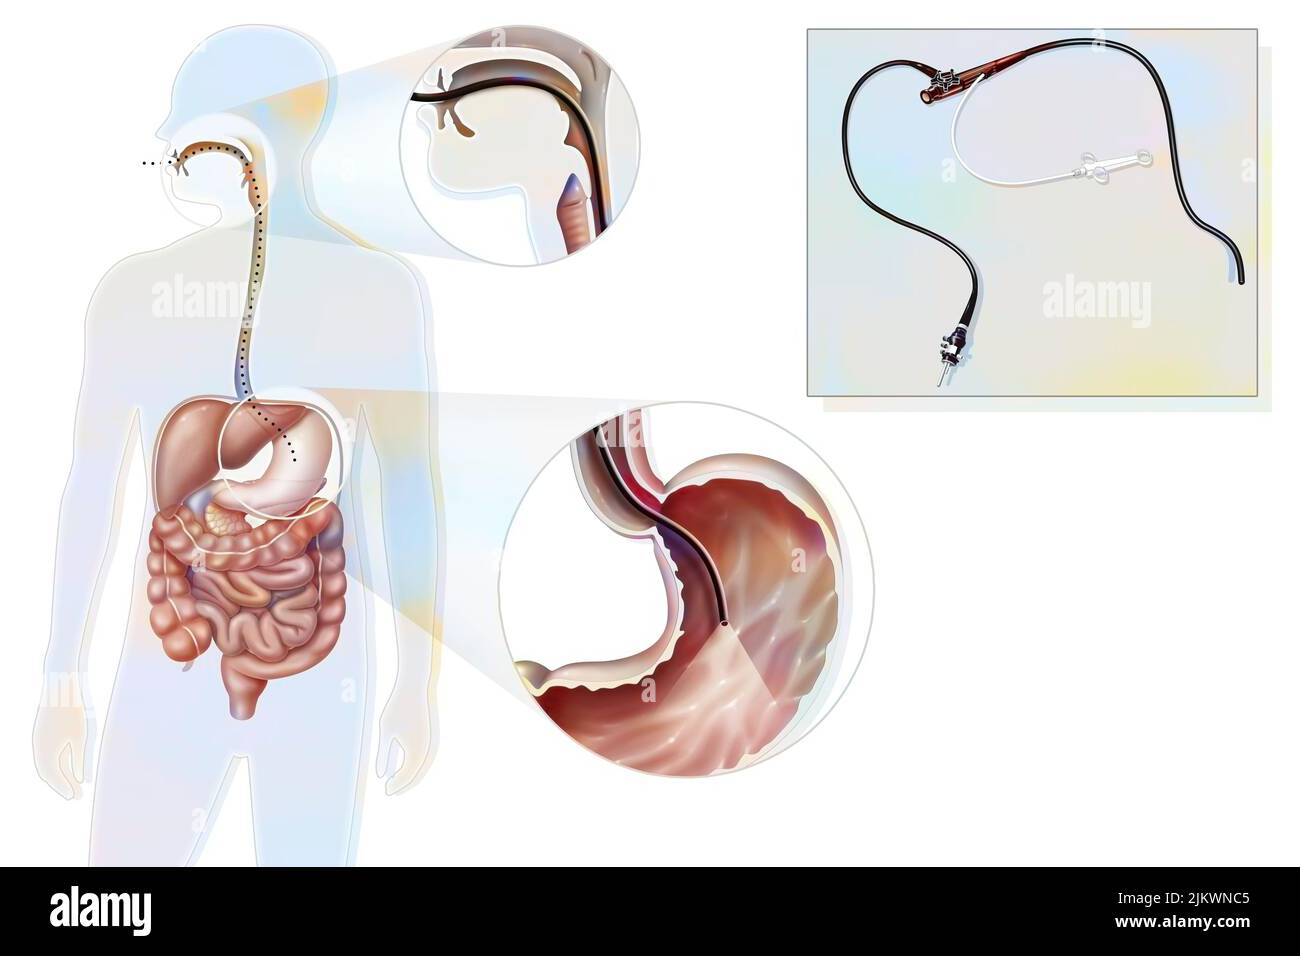 Endoscopy Cut Out Stock Images & Pictures - Alamy